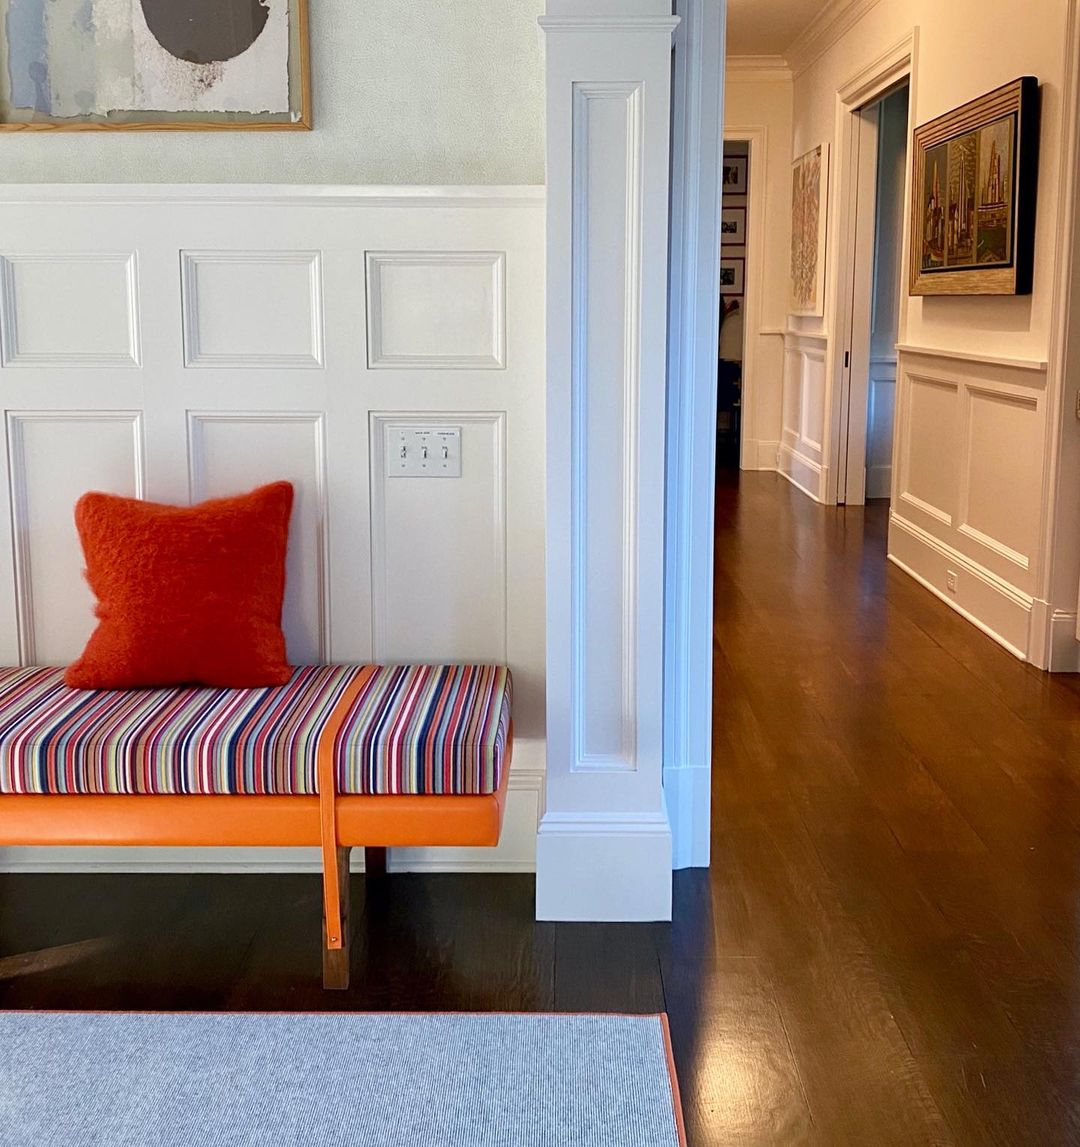 10 Ways to Make Your Entryway Bench Look More Inviting